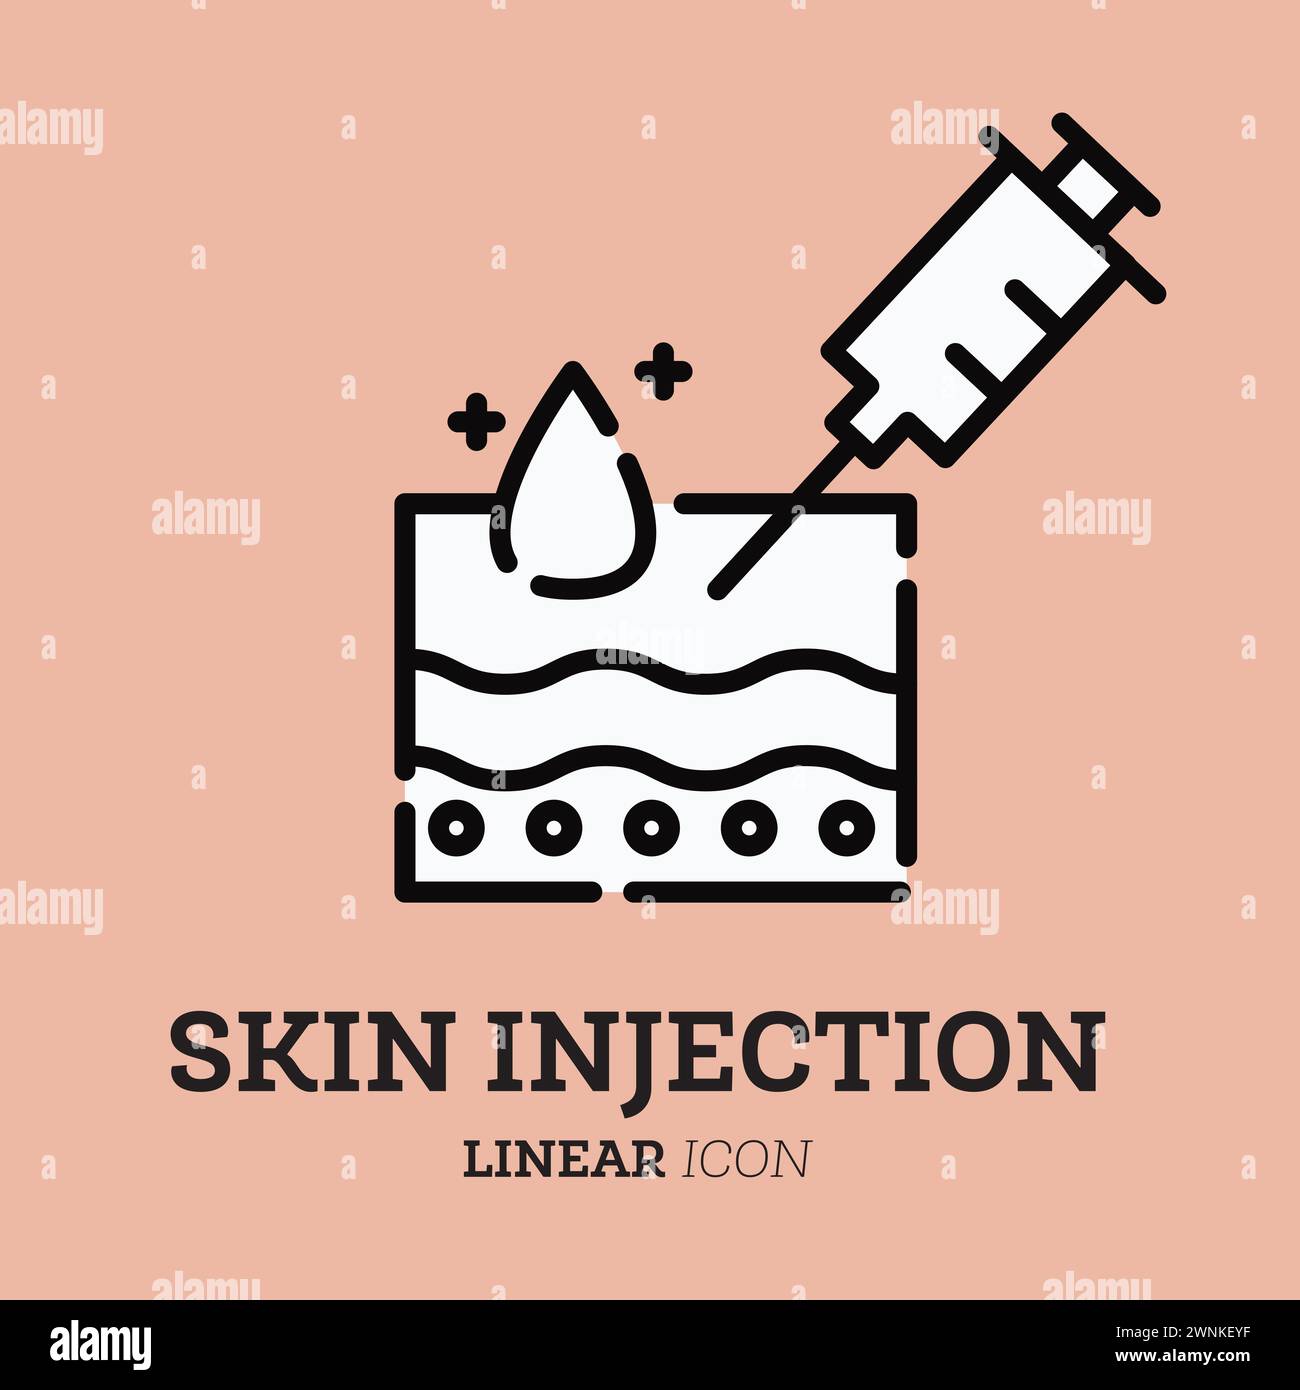 Skin injection. Linear icon with syringe and structure of skin. Medical, dermatology treatment vaccine, filler, hyaluronic acid. Vector illustration. Stock Vector